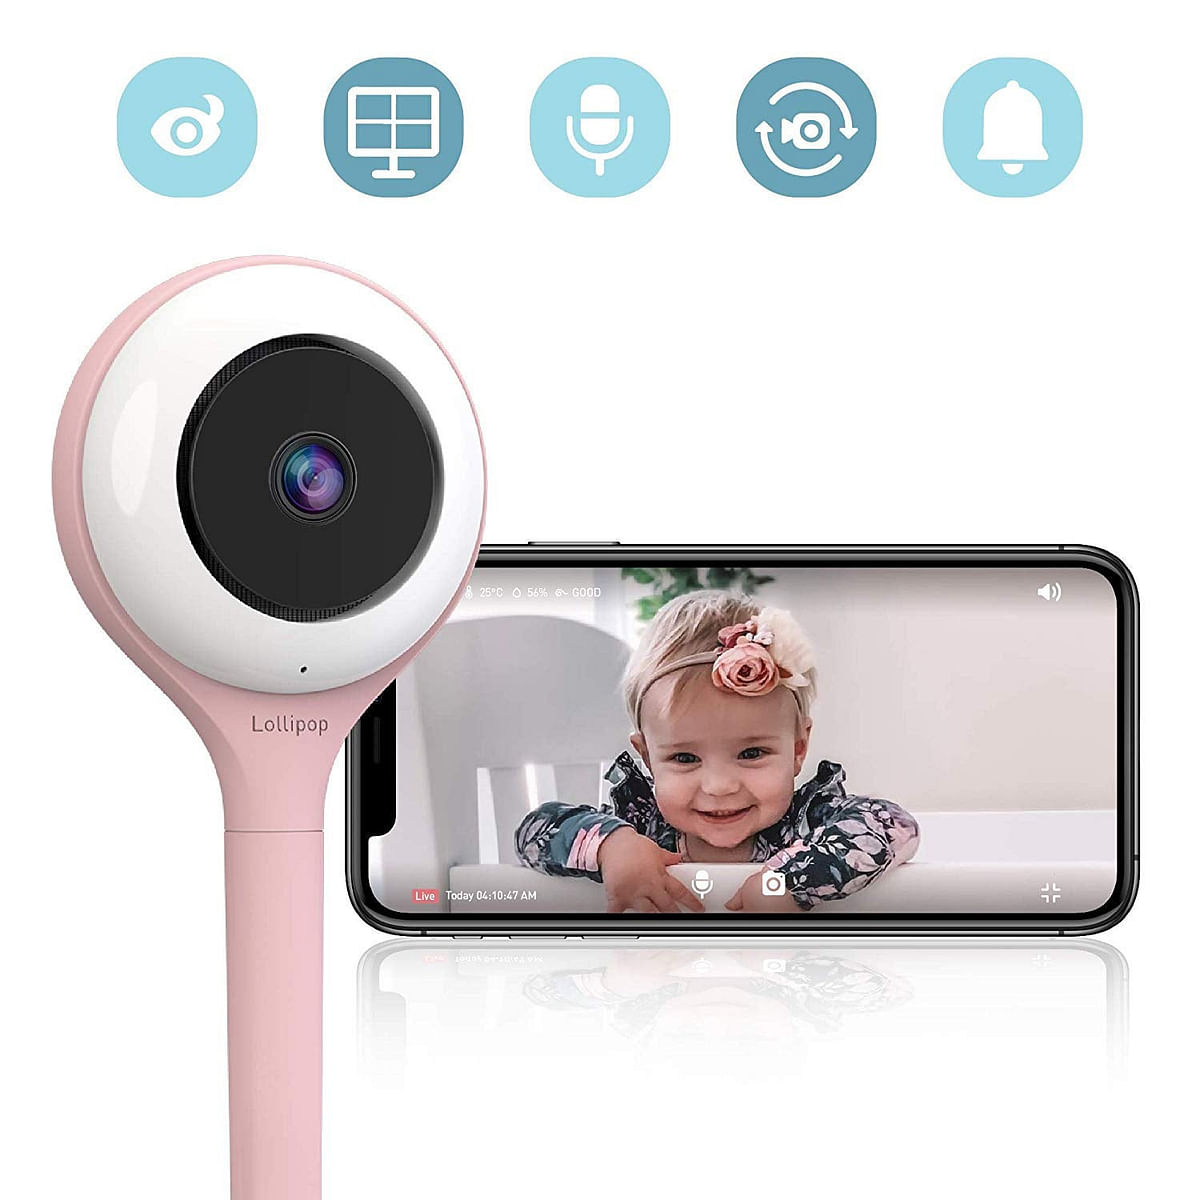 Lollipop - HD WiFi Video Baby Monitor - Cotton Candy Pink